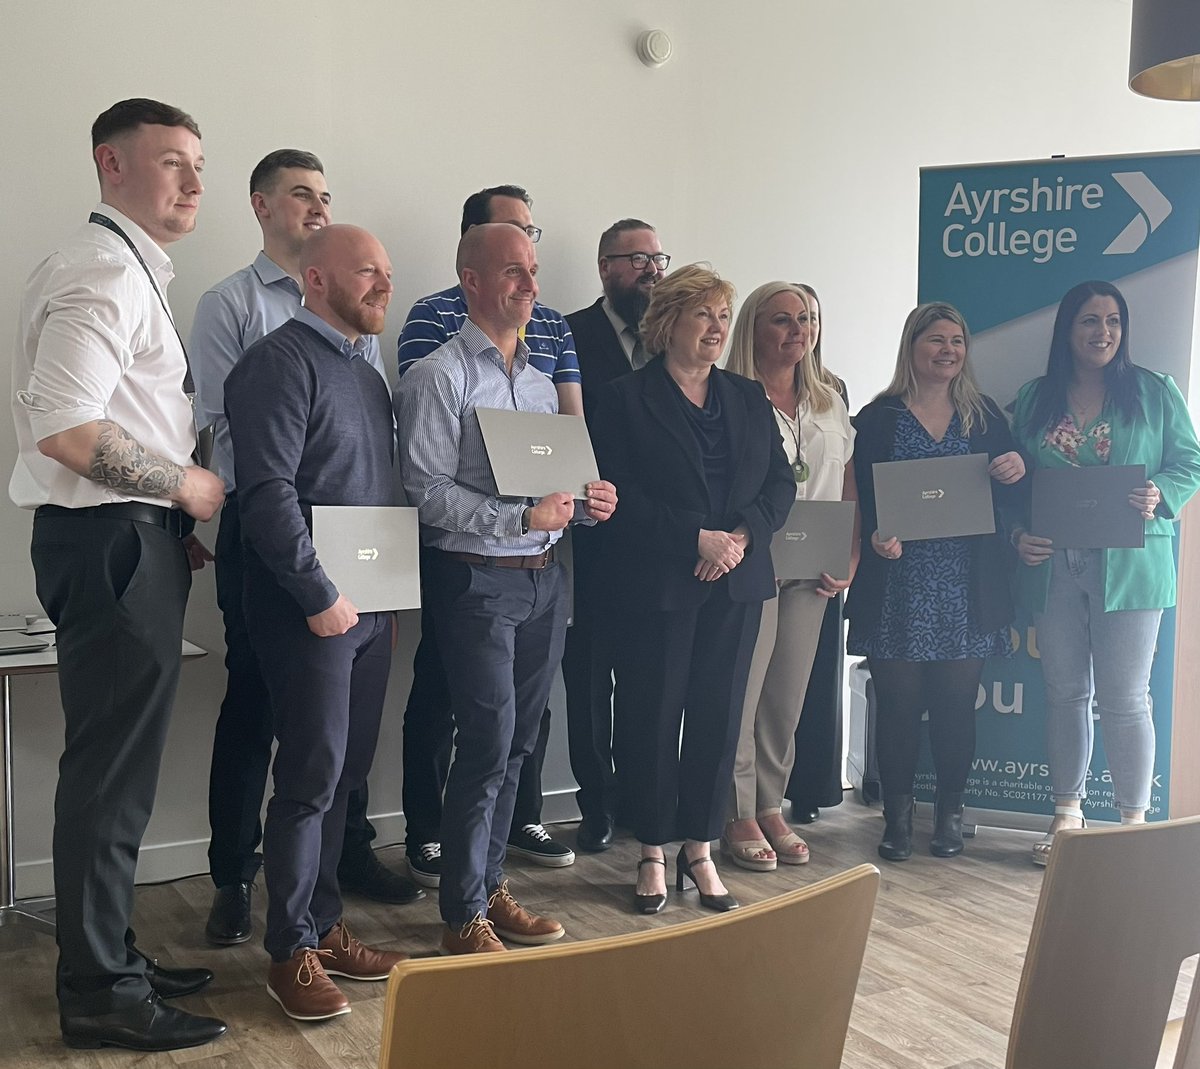 What a privilege it was to attend the presentations and Graduation of @AyrshireColl Aspire programme. The effort they have put in over the course of the programme is incredible. Well done to all. I can’t wait to see the projects move forward #learningandteaching #staffdevelopment